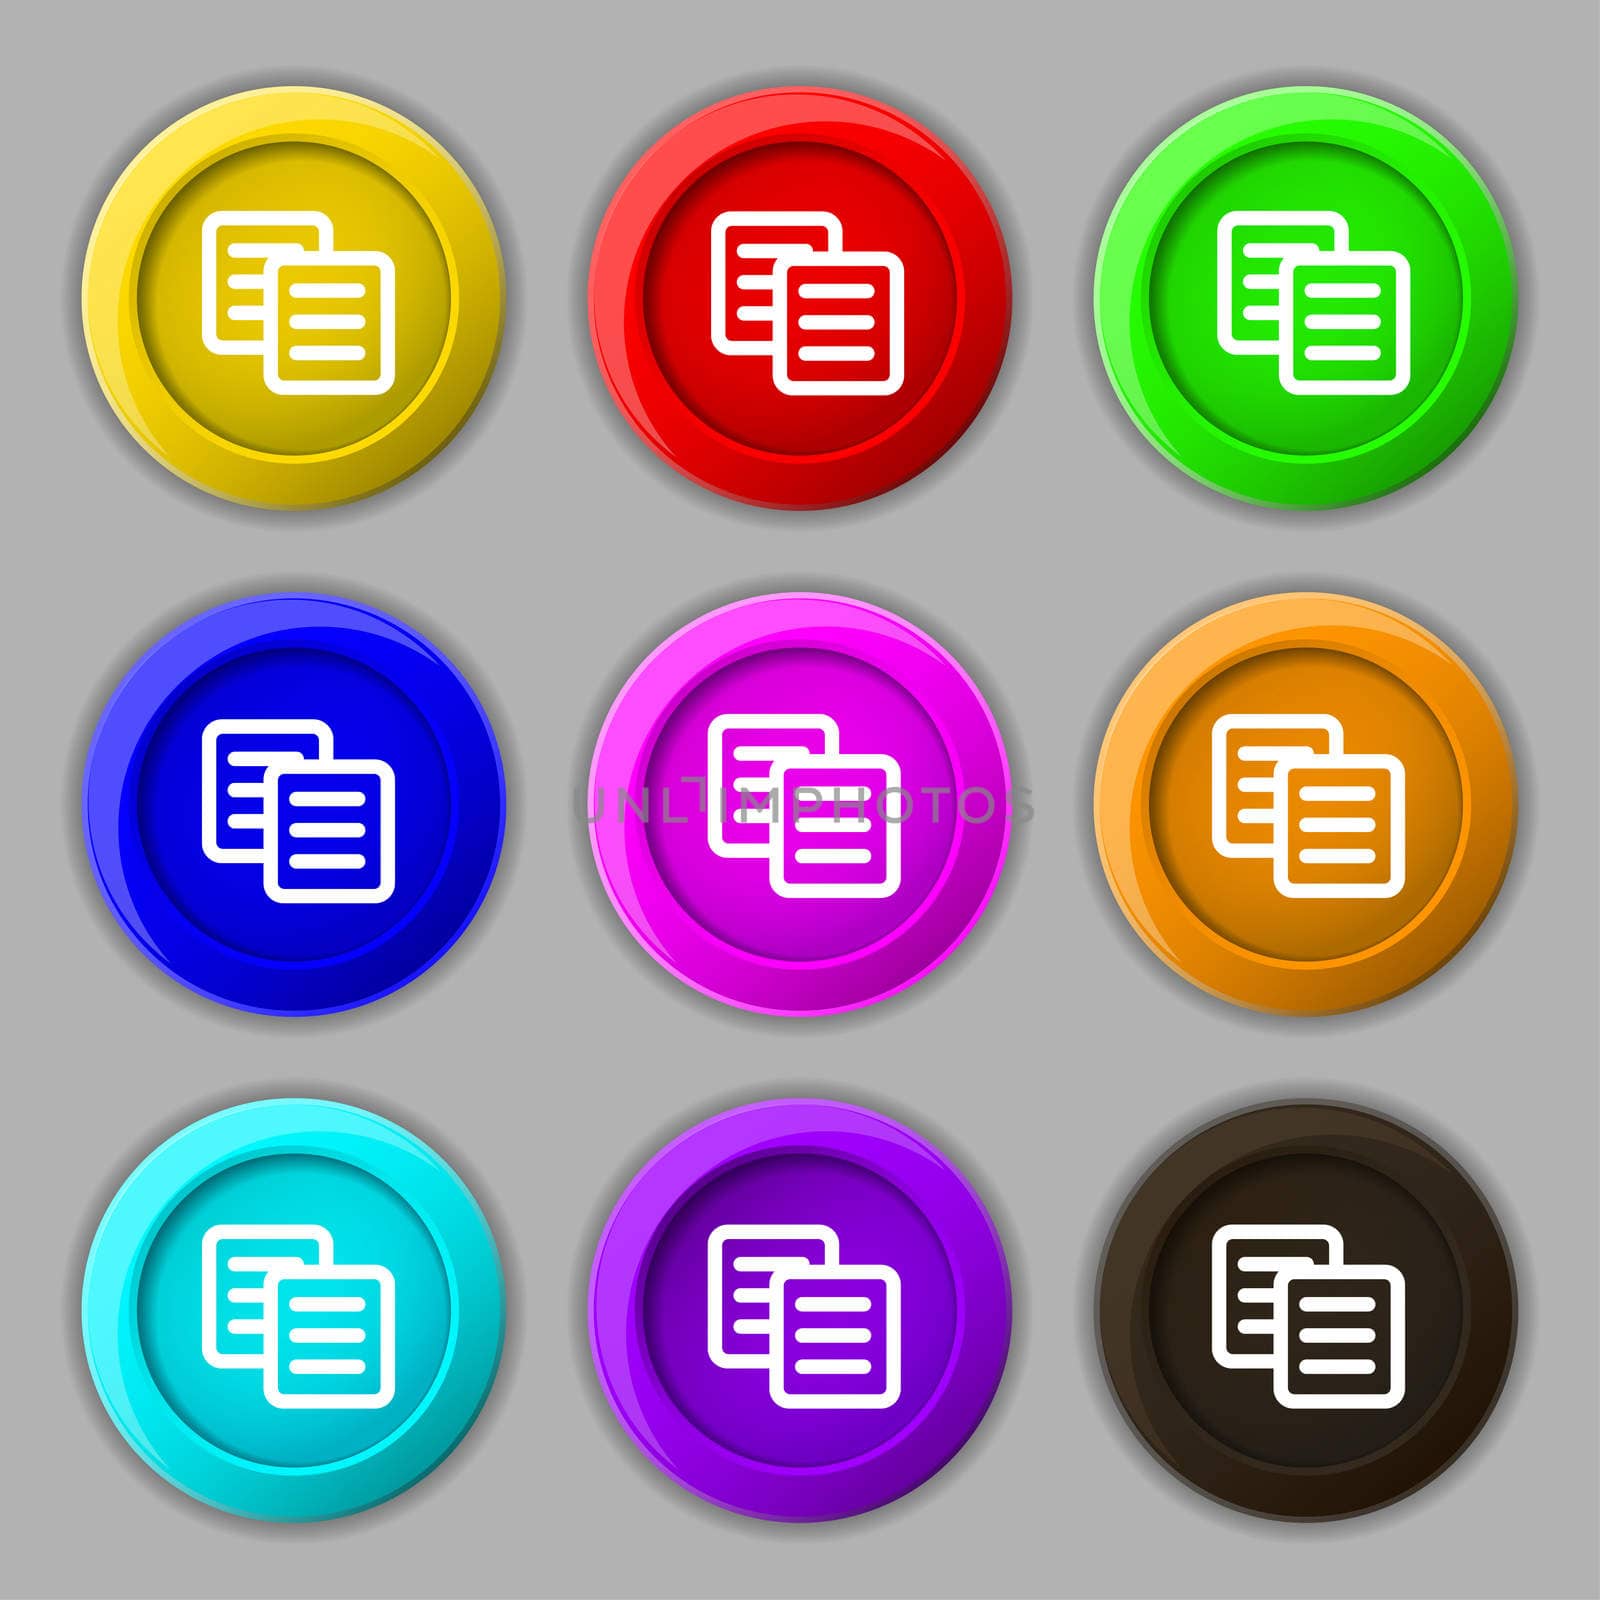 copy icon sign. symbol on nine round colourful buttons.  by serhii_lohvyniuk